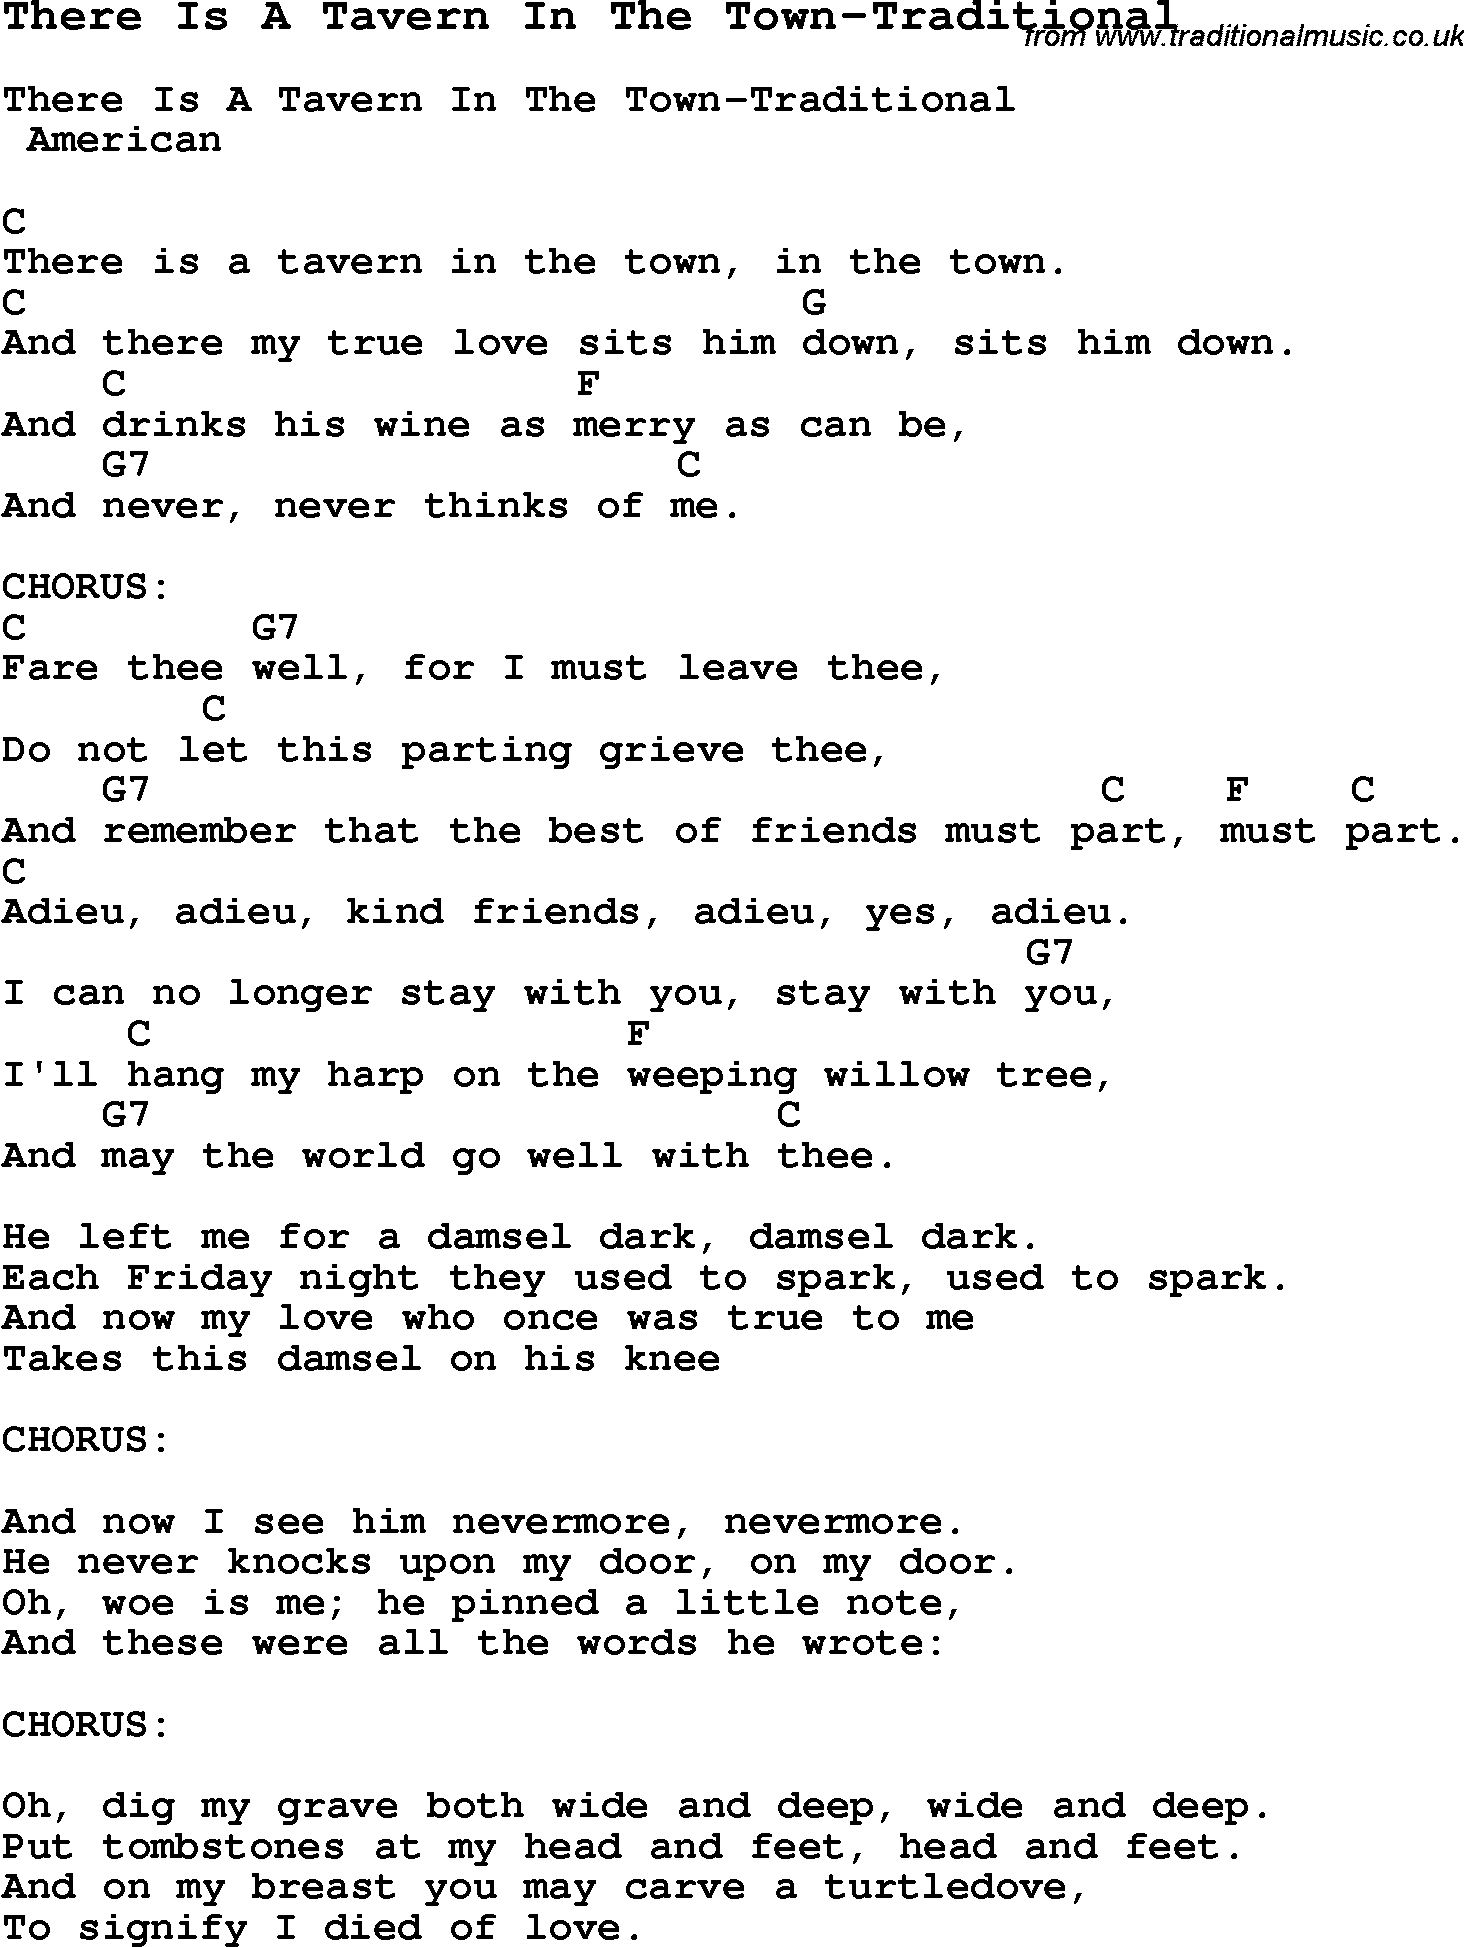 Summer-Camp Song, There Is A Tavern In The Town-Traditional, with lyrics and chords for Ukulele, Guitar Banjo etc.